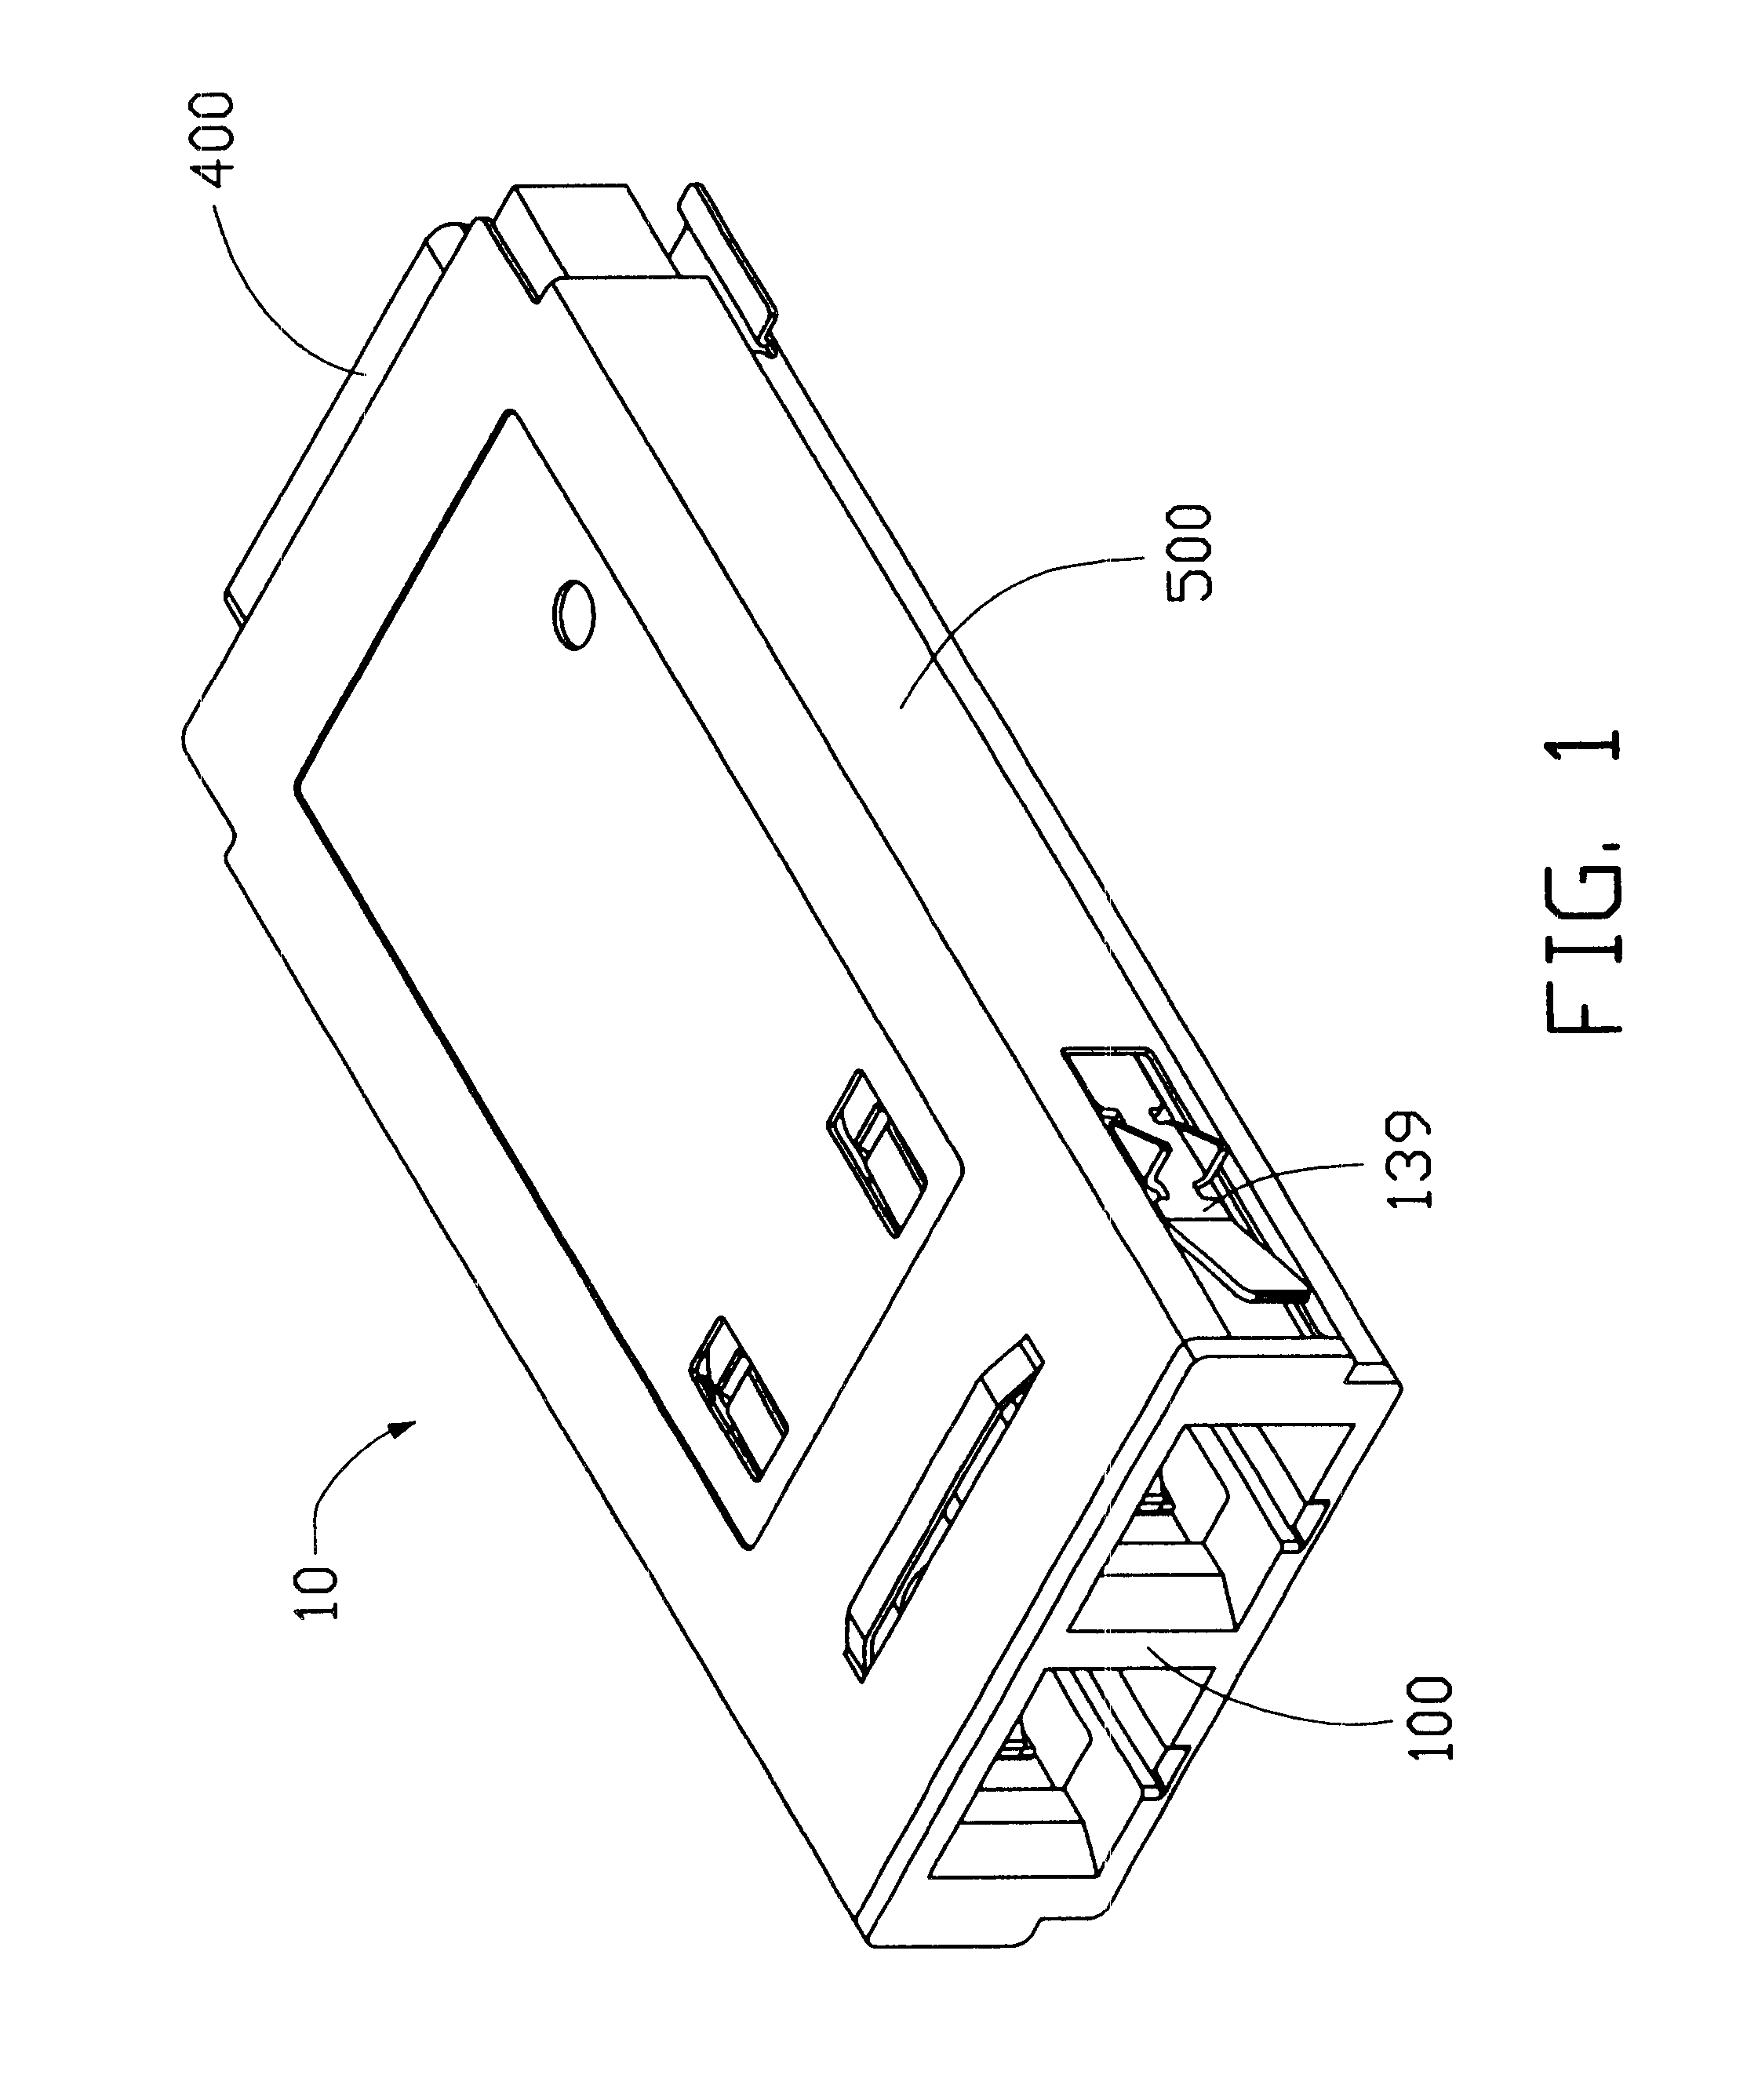 Optoelectronic transceiver module